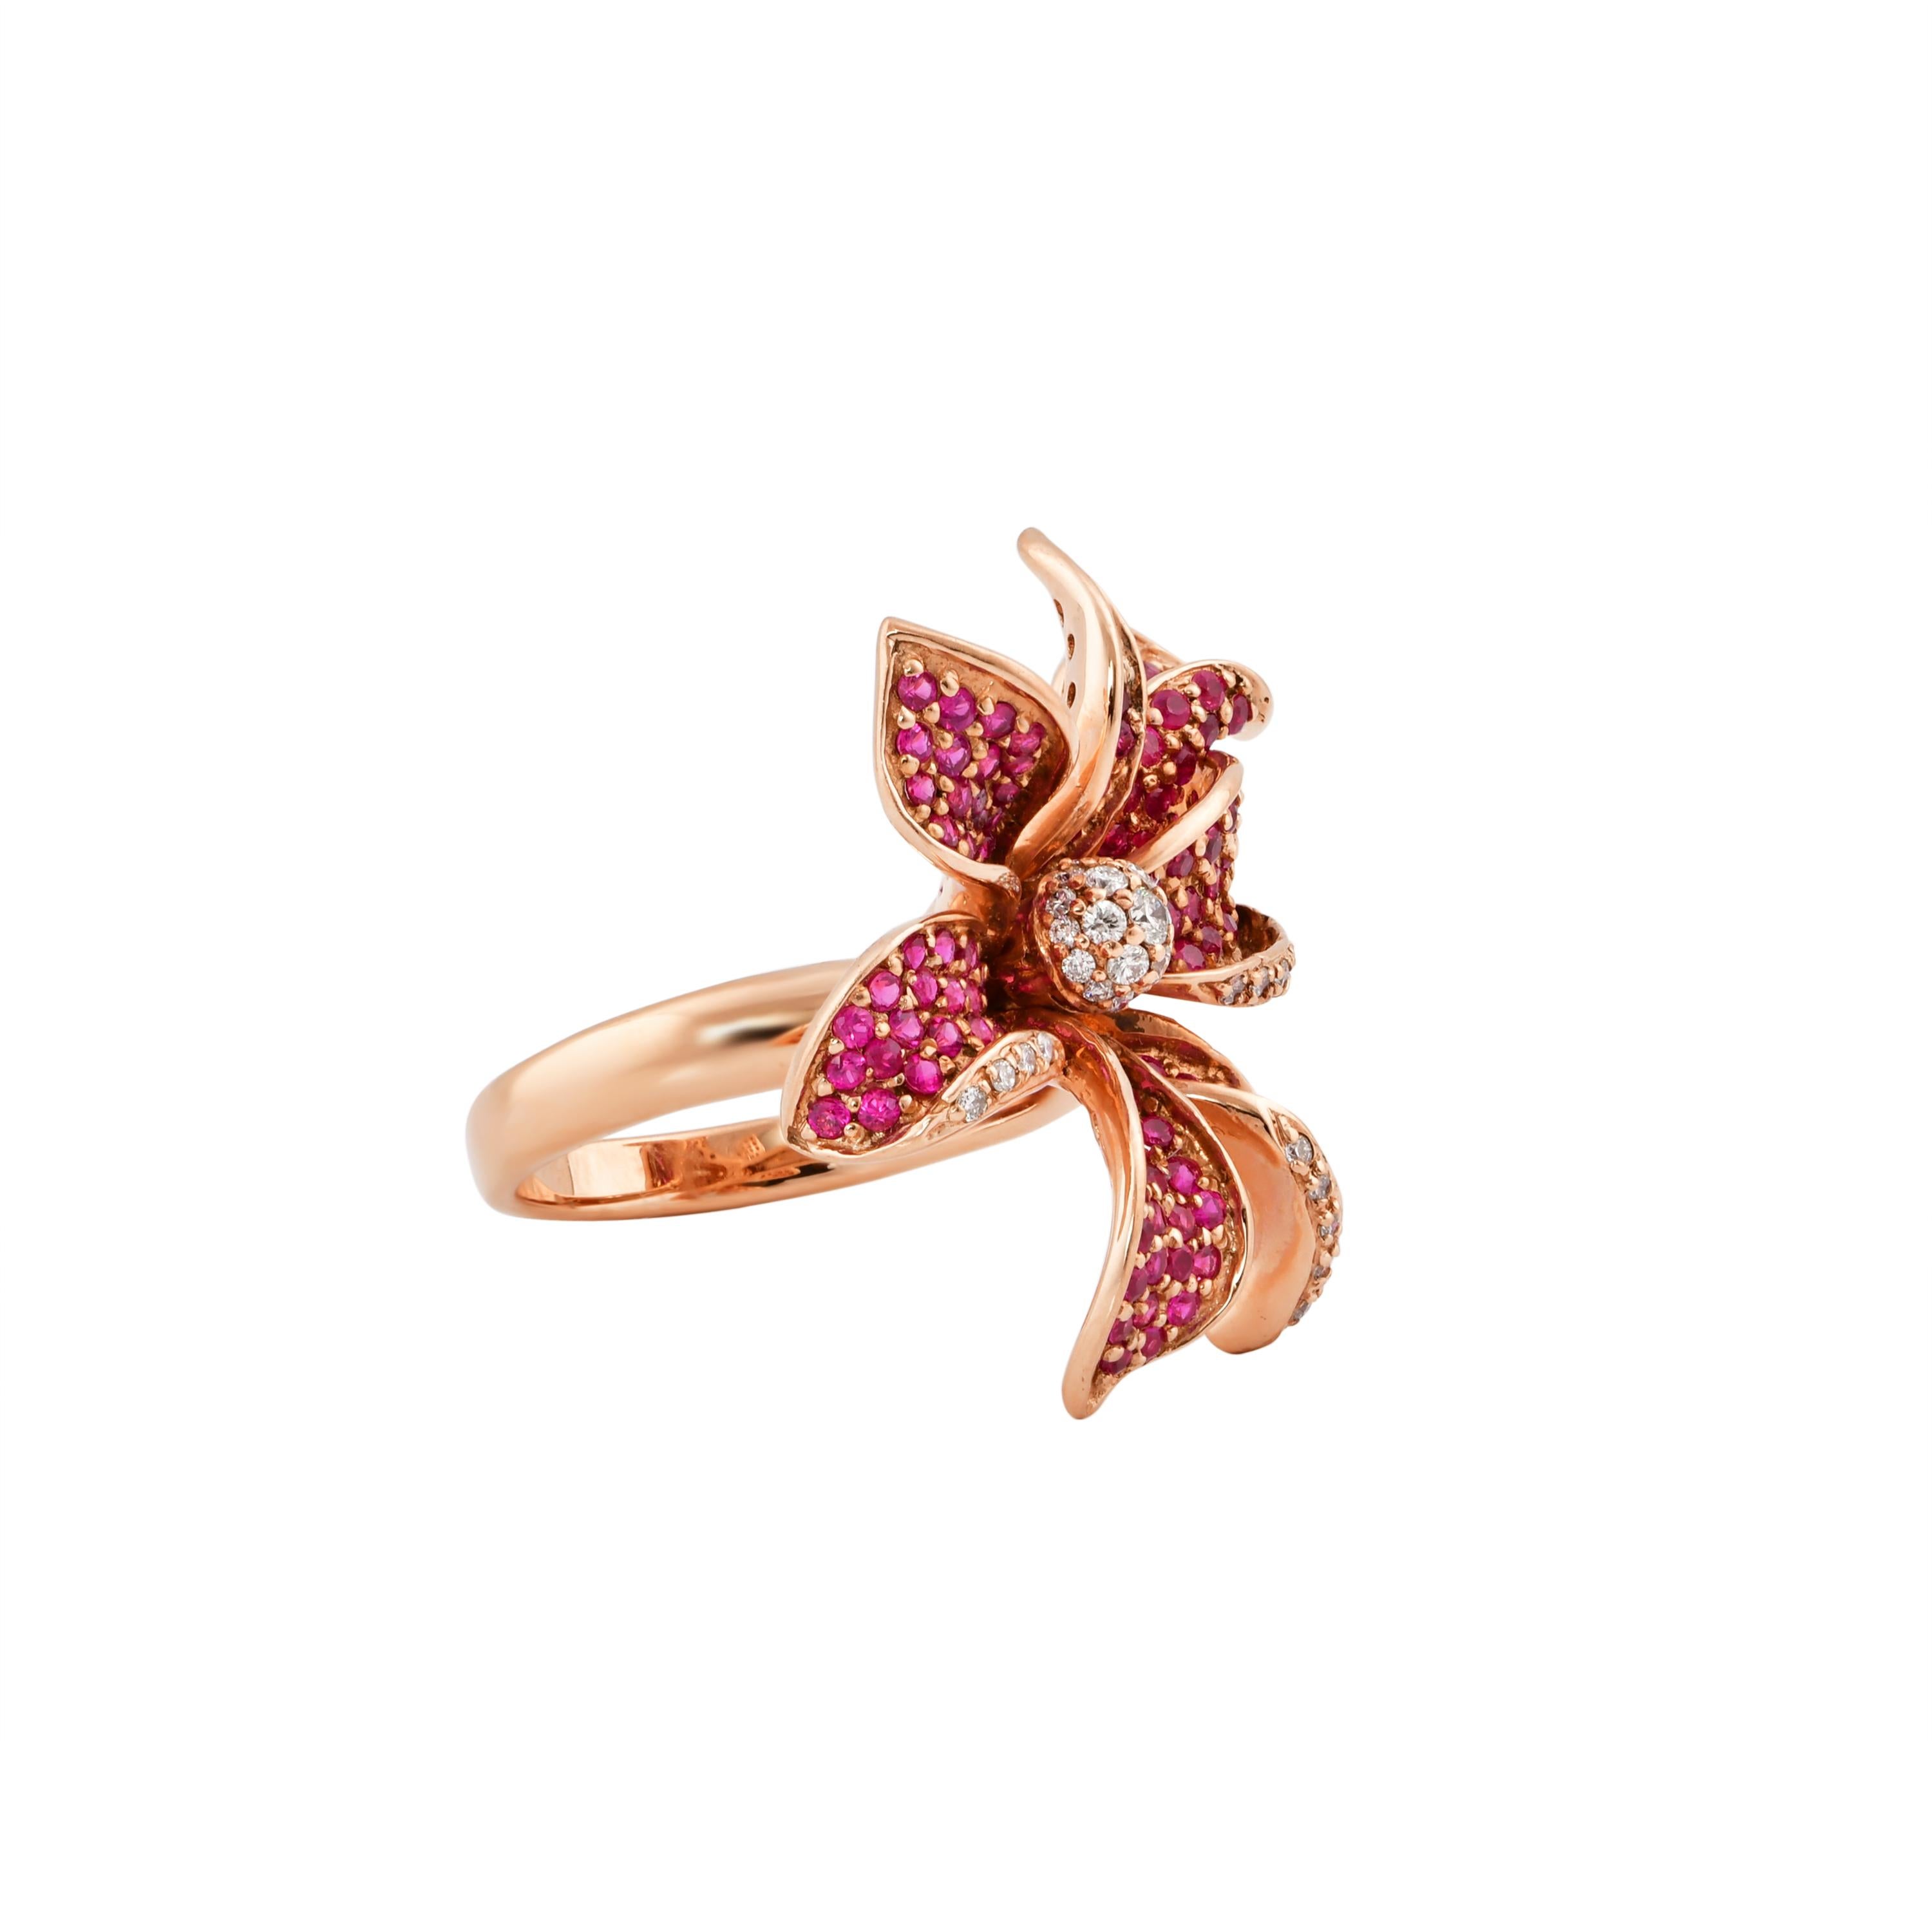 Contemporary Floral 1.7 Carat Ruby and Diamond Ring in 14 Karat Rose Gold